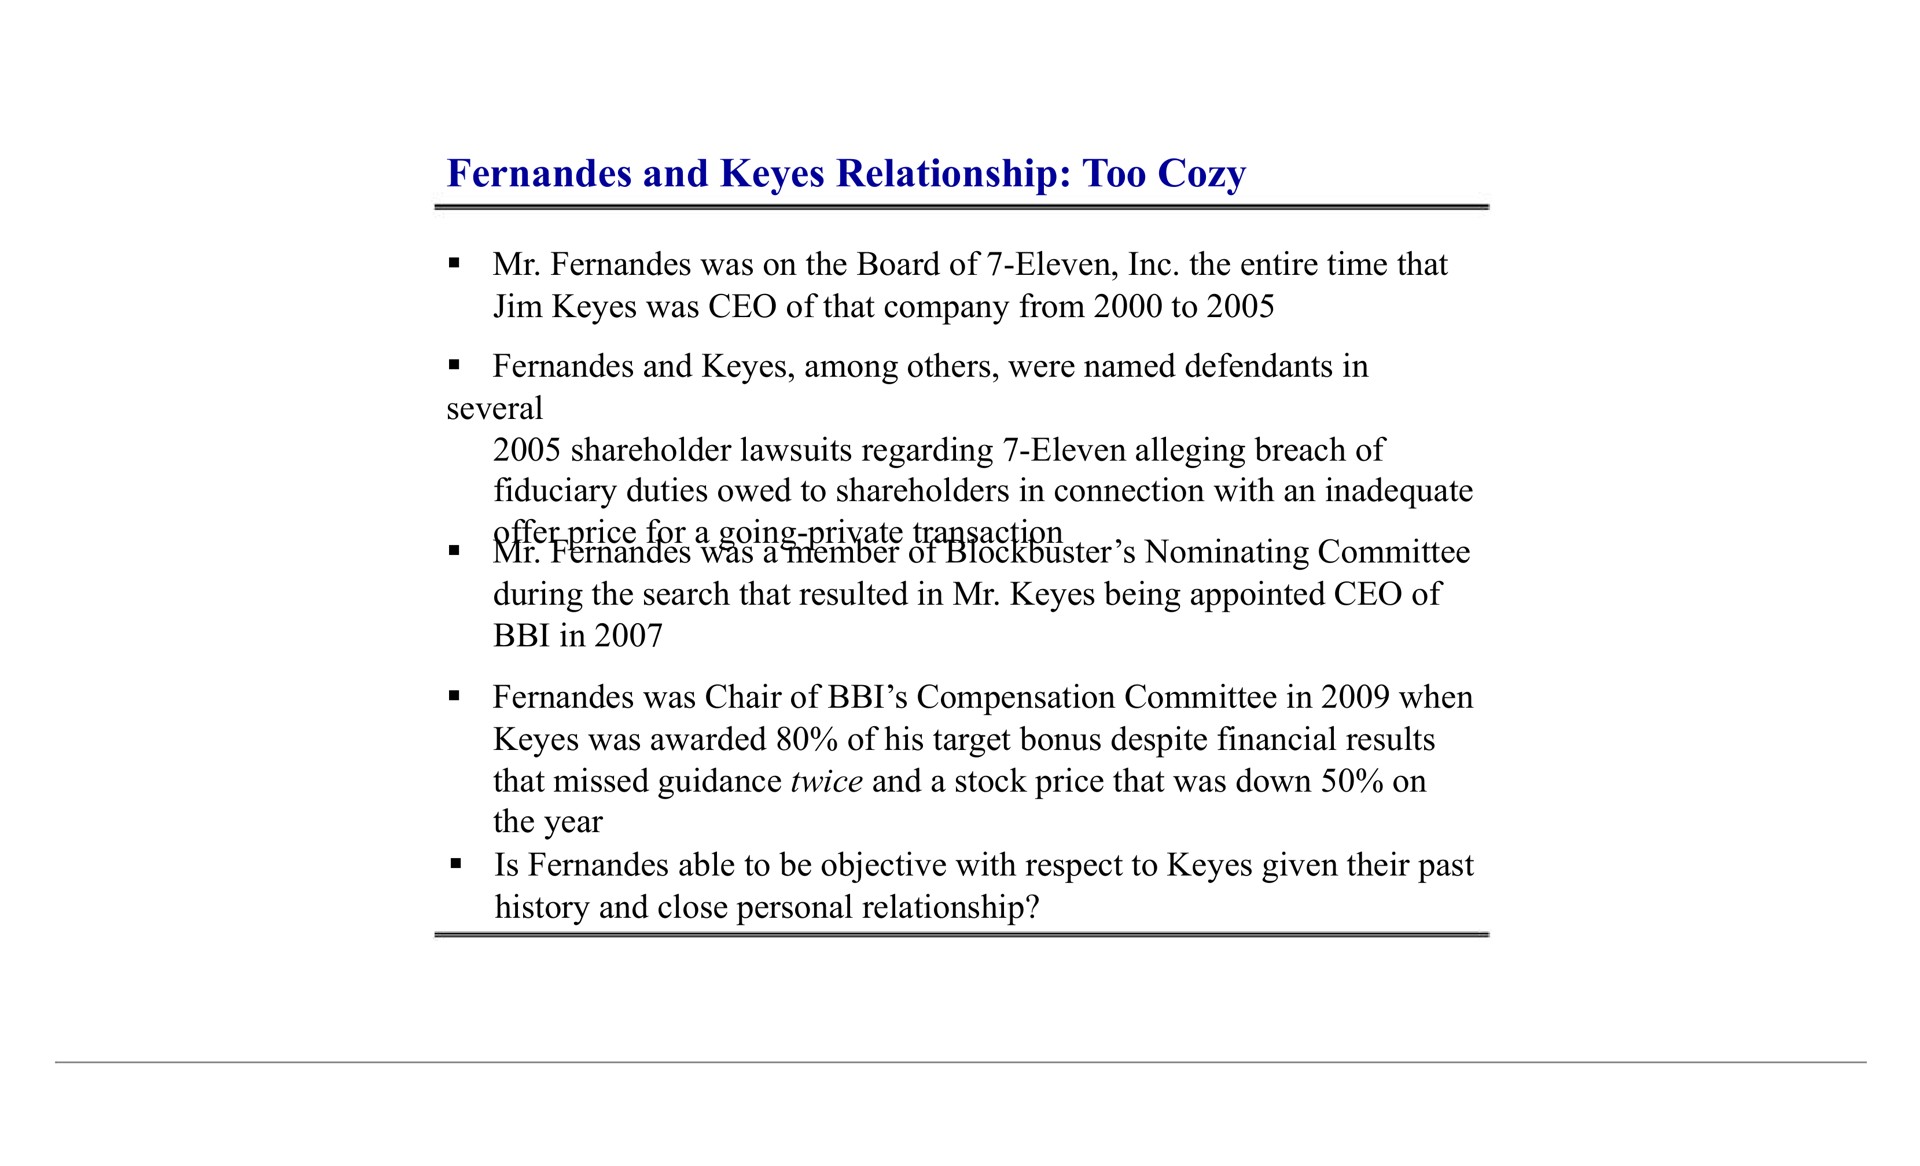 and keyes relationship too cozy shareholder lawsuits regarding eleven alleging breach of fiduciary duties owed to shareholders in connection with an inadequate in was chair of compensation committee in when the year history close personal | Blockbuster Video